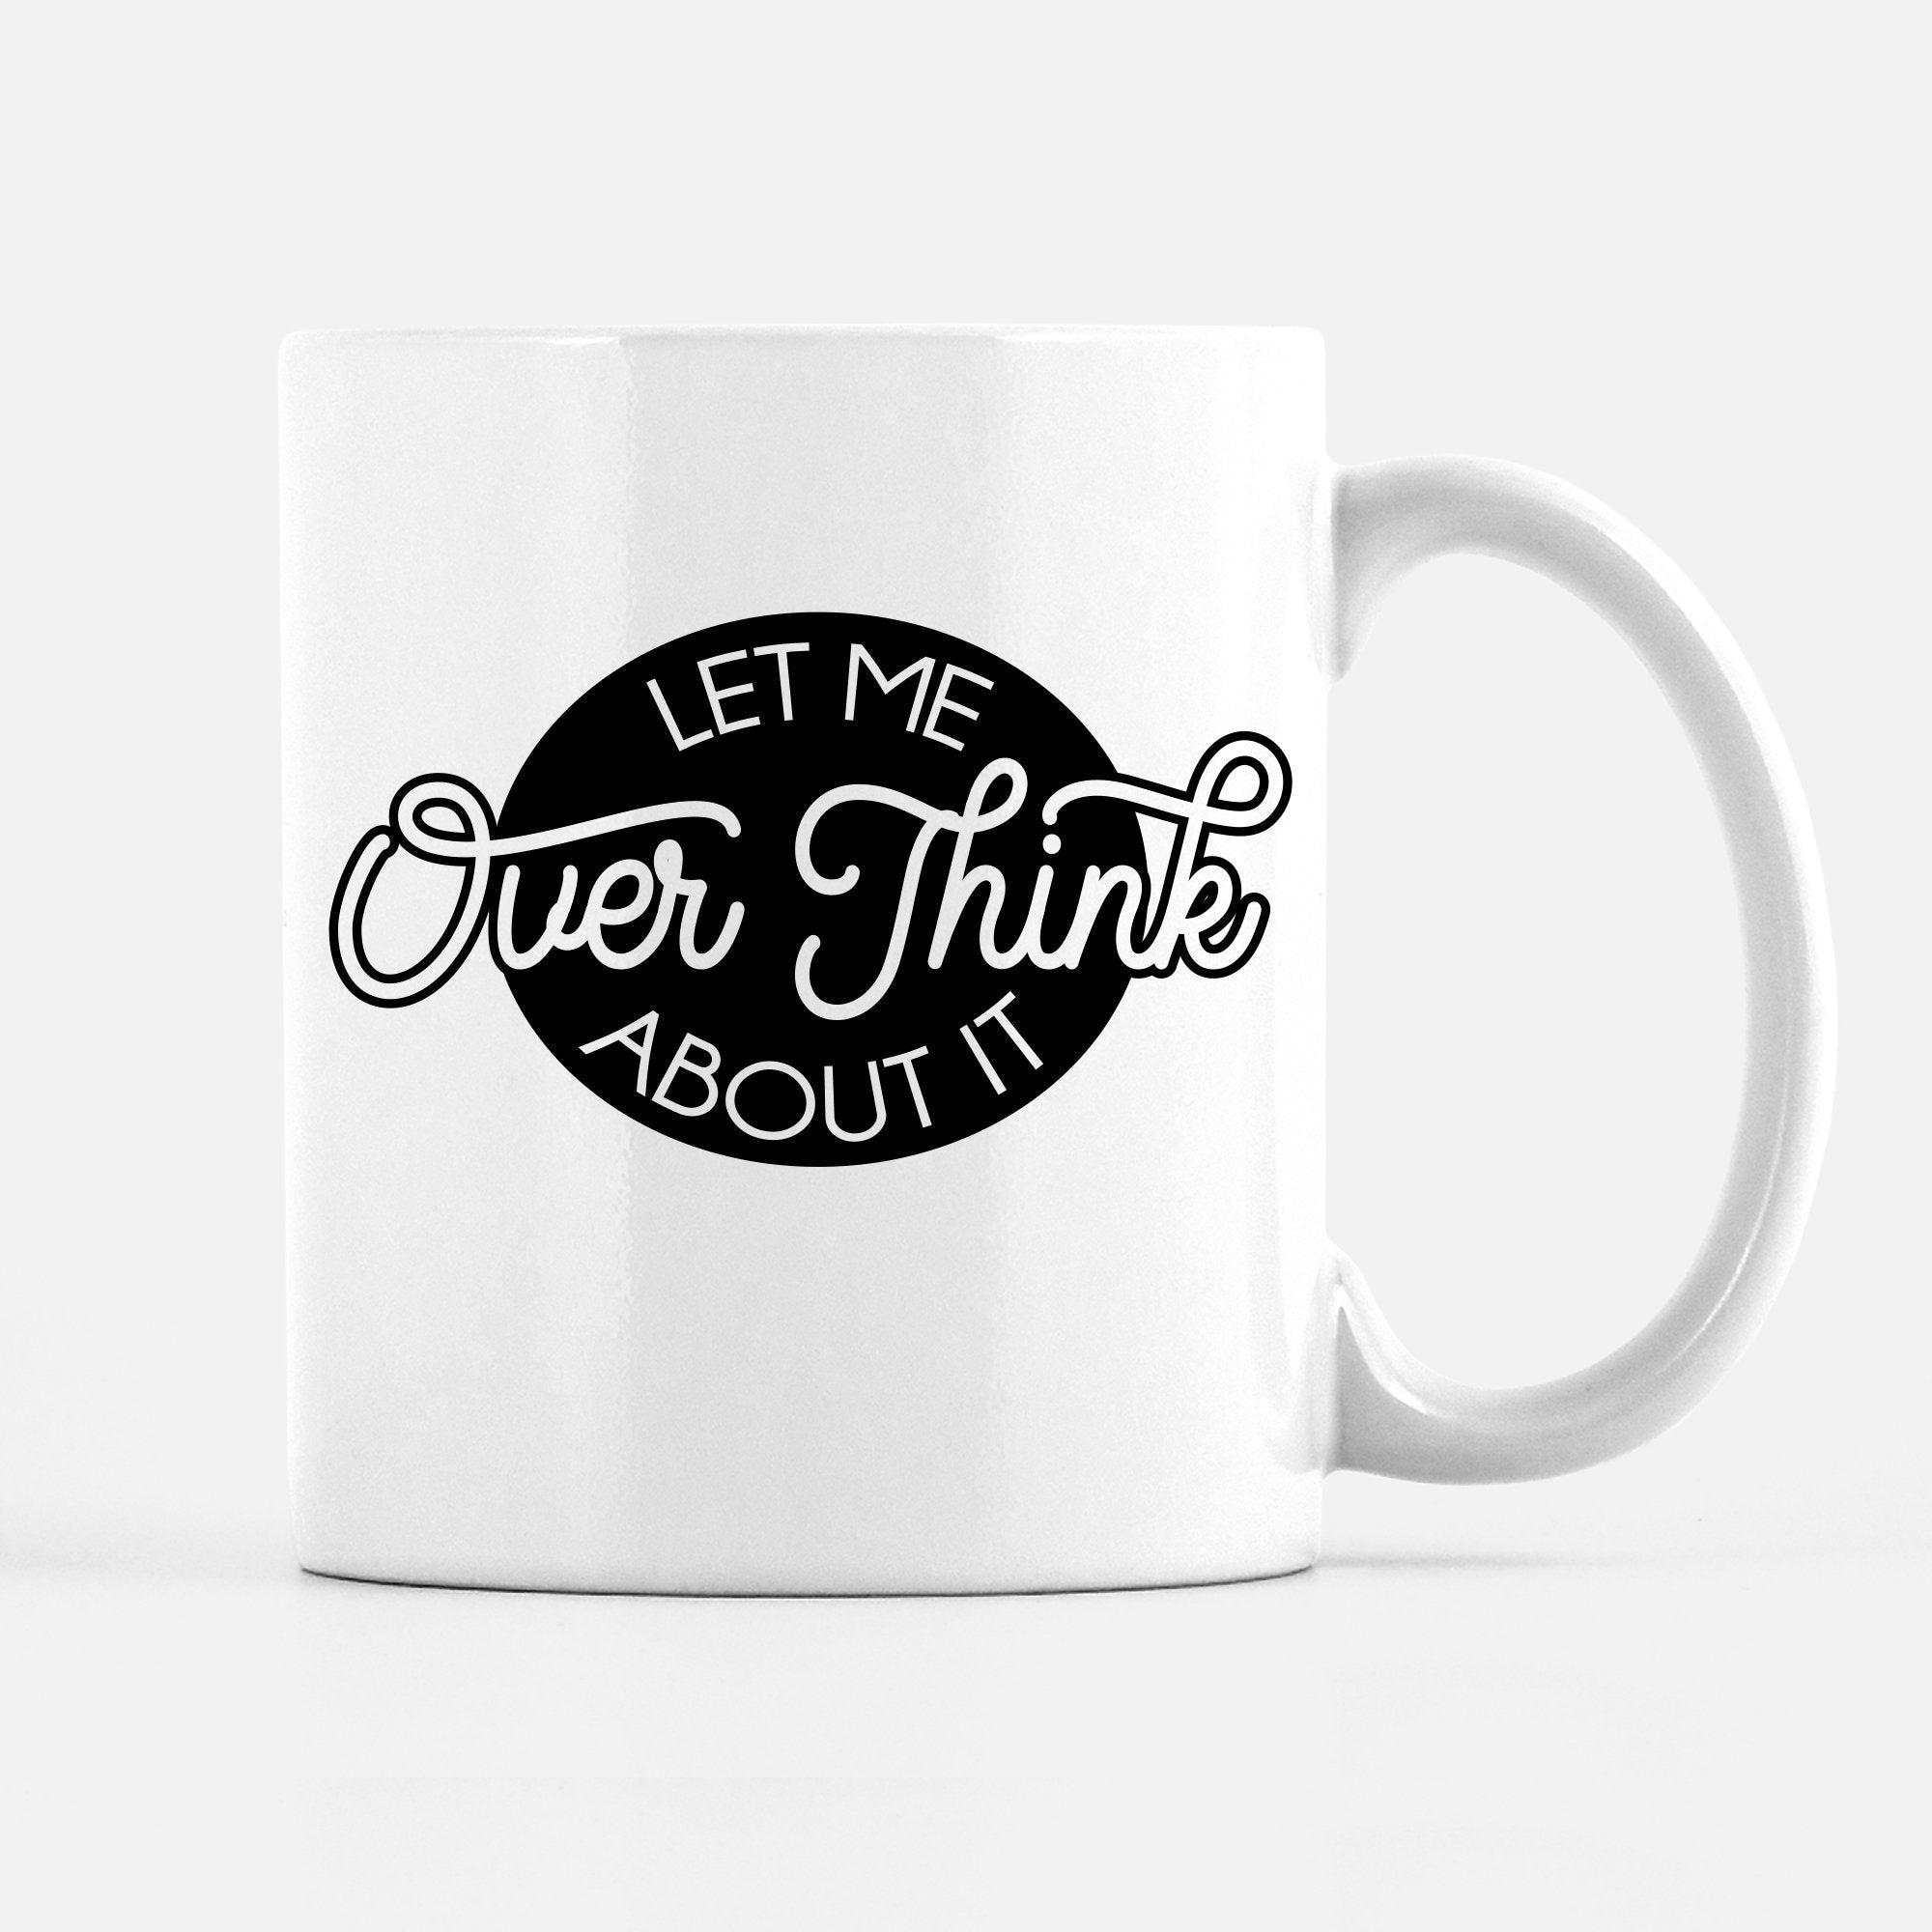 Let Me Overthink about it funny coffee mug, PIPSY.COM